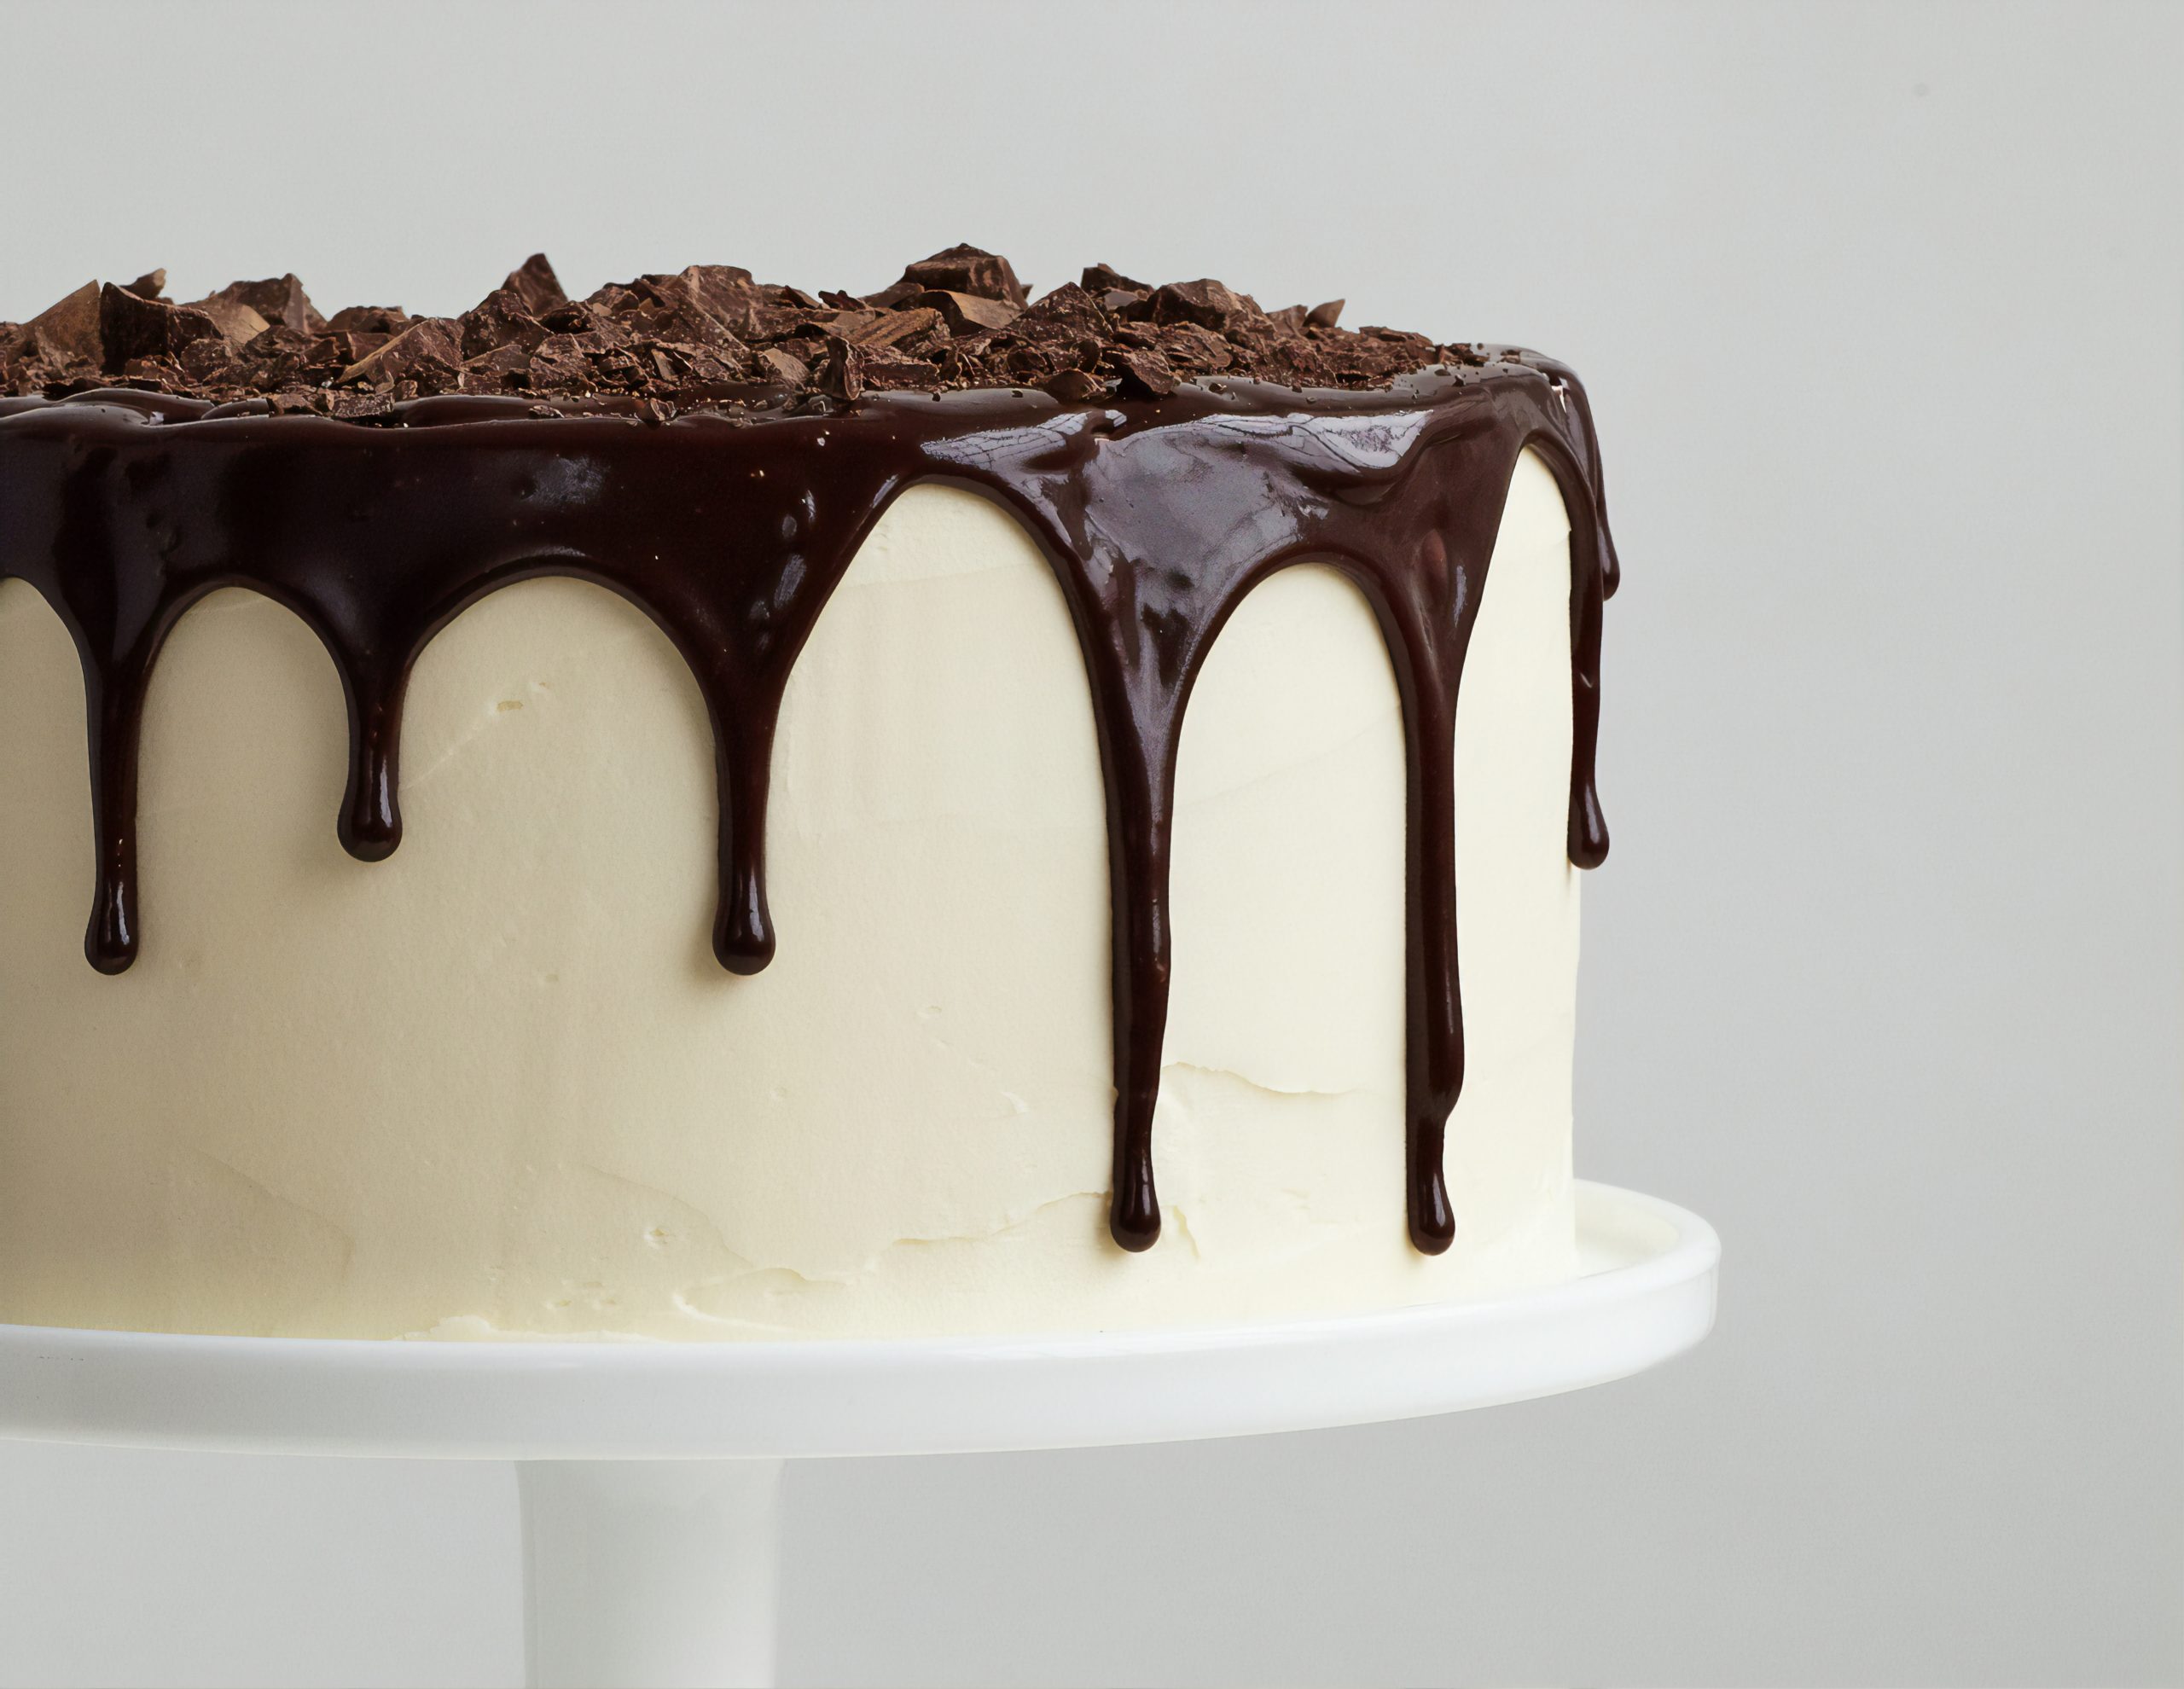 Everything You Need to Launch An At-Home Cake Business